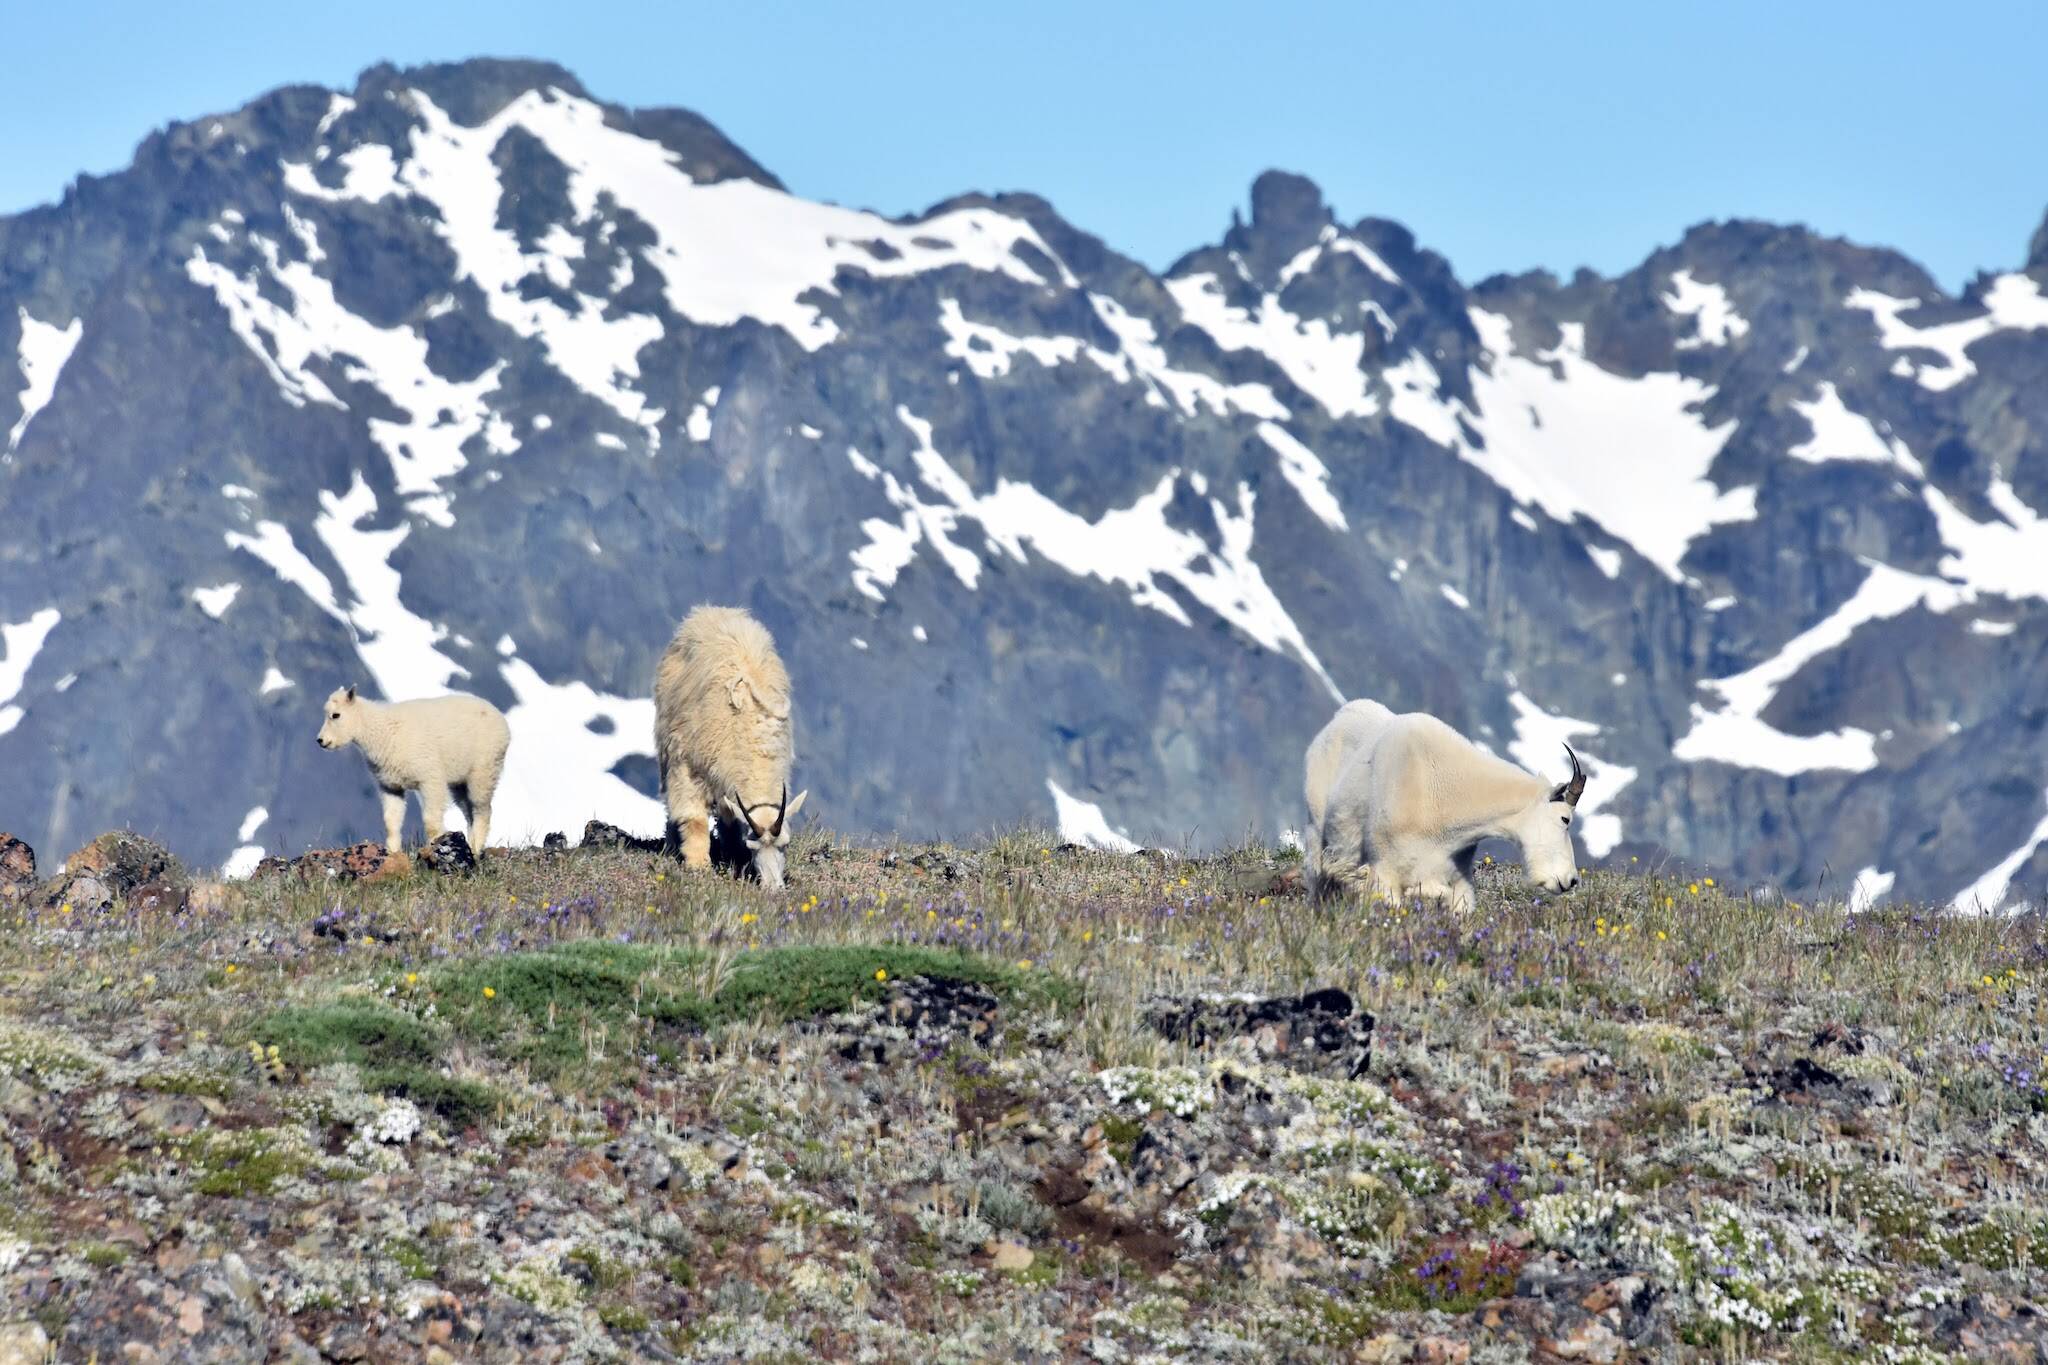 Mountain goats graze in the alpine of the Buckhorn Wilderness in the Olympic Mountains in July 2017. (Caleb Hutton / The Herald)